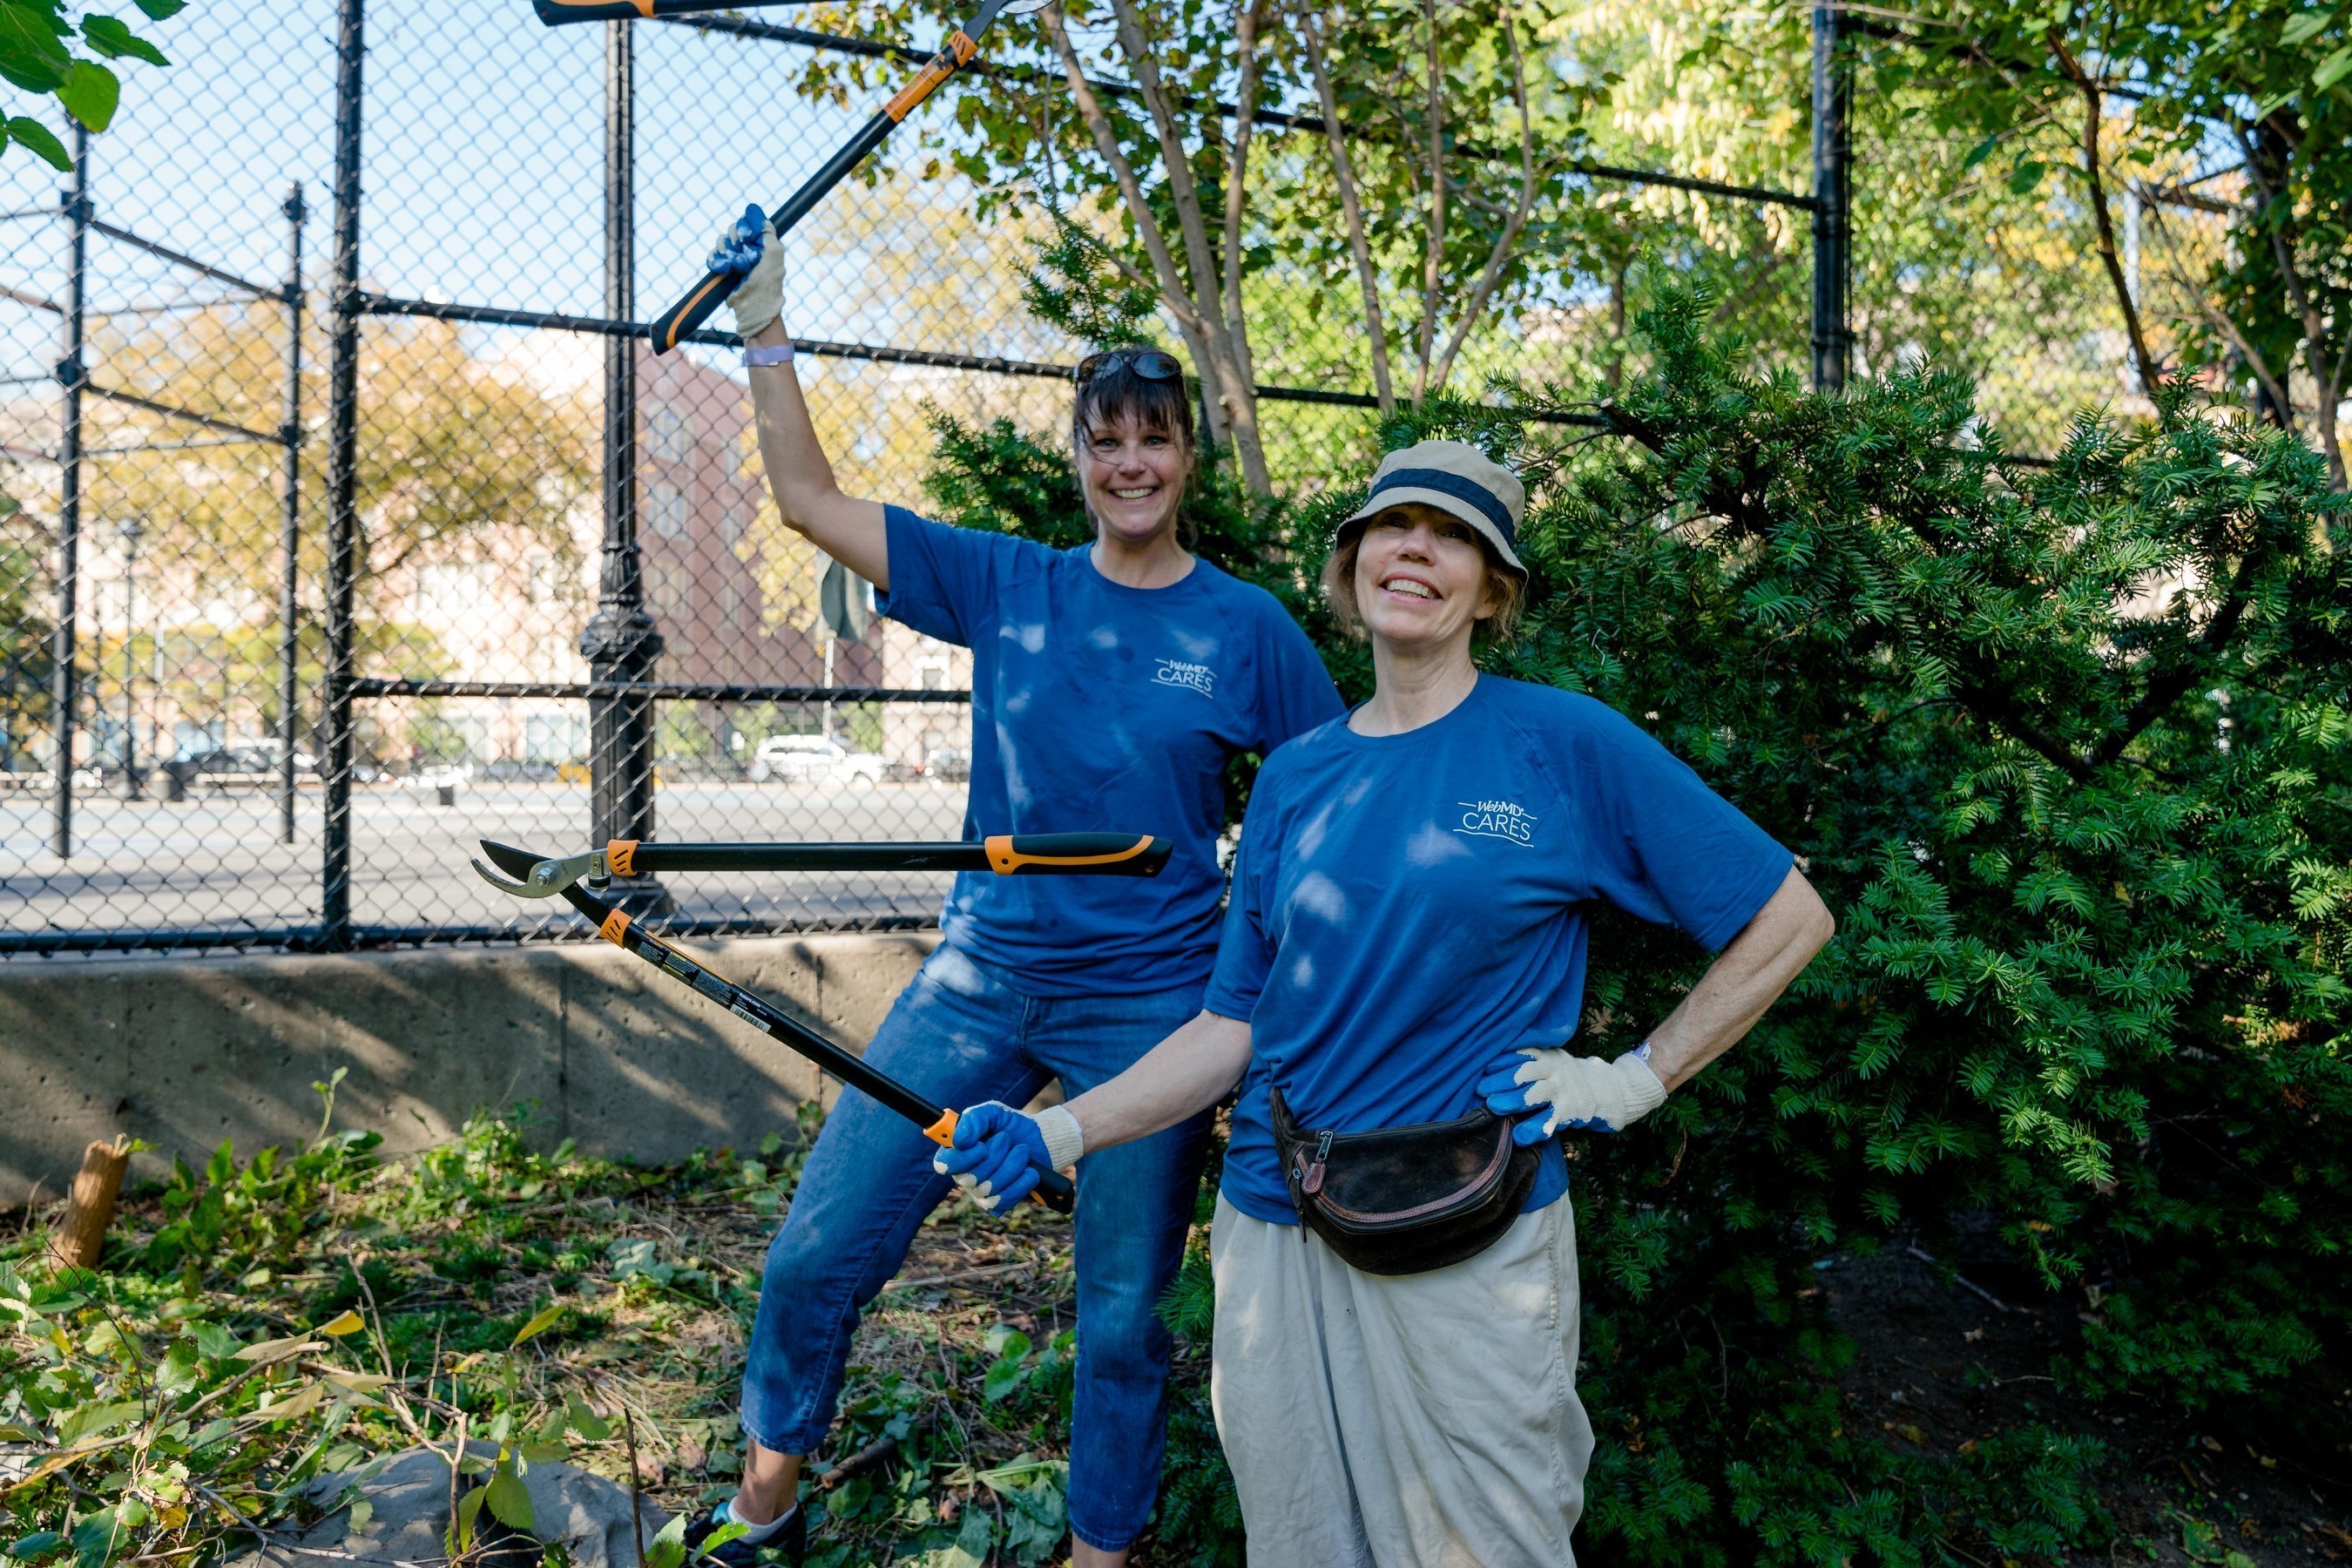 WebMD Cares Impact Day 2016 - NYC employees work to remove invasive plants, making the park more accessible.